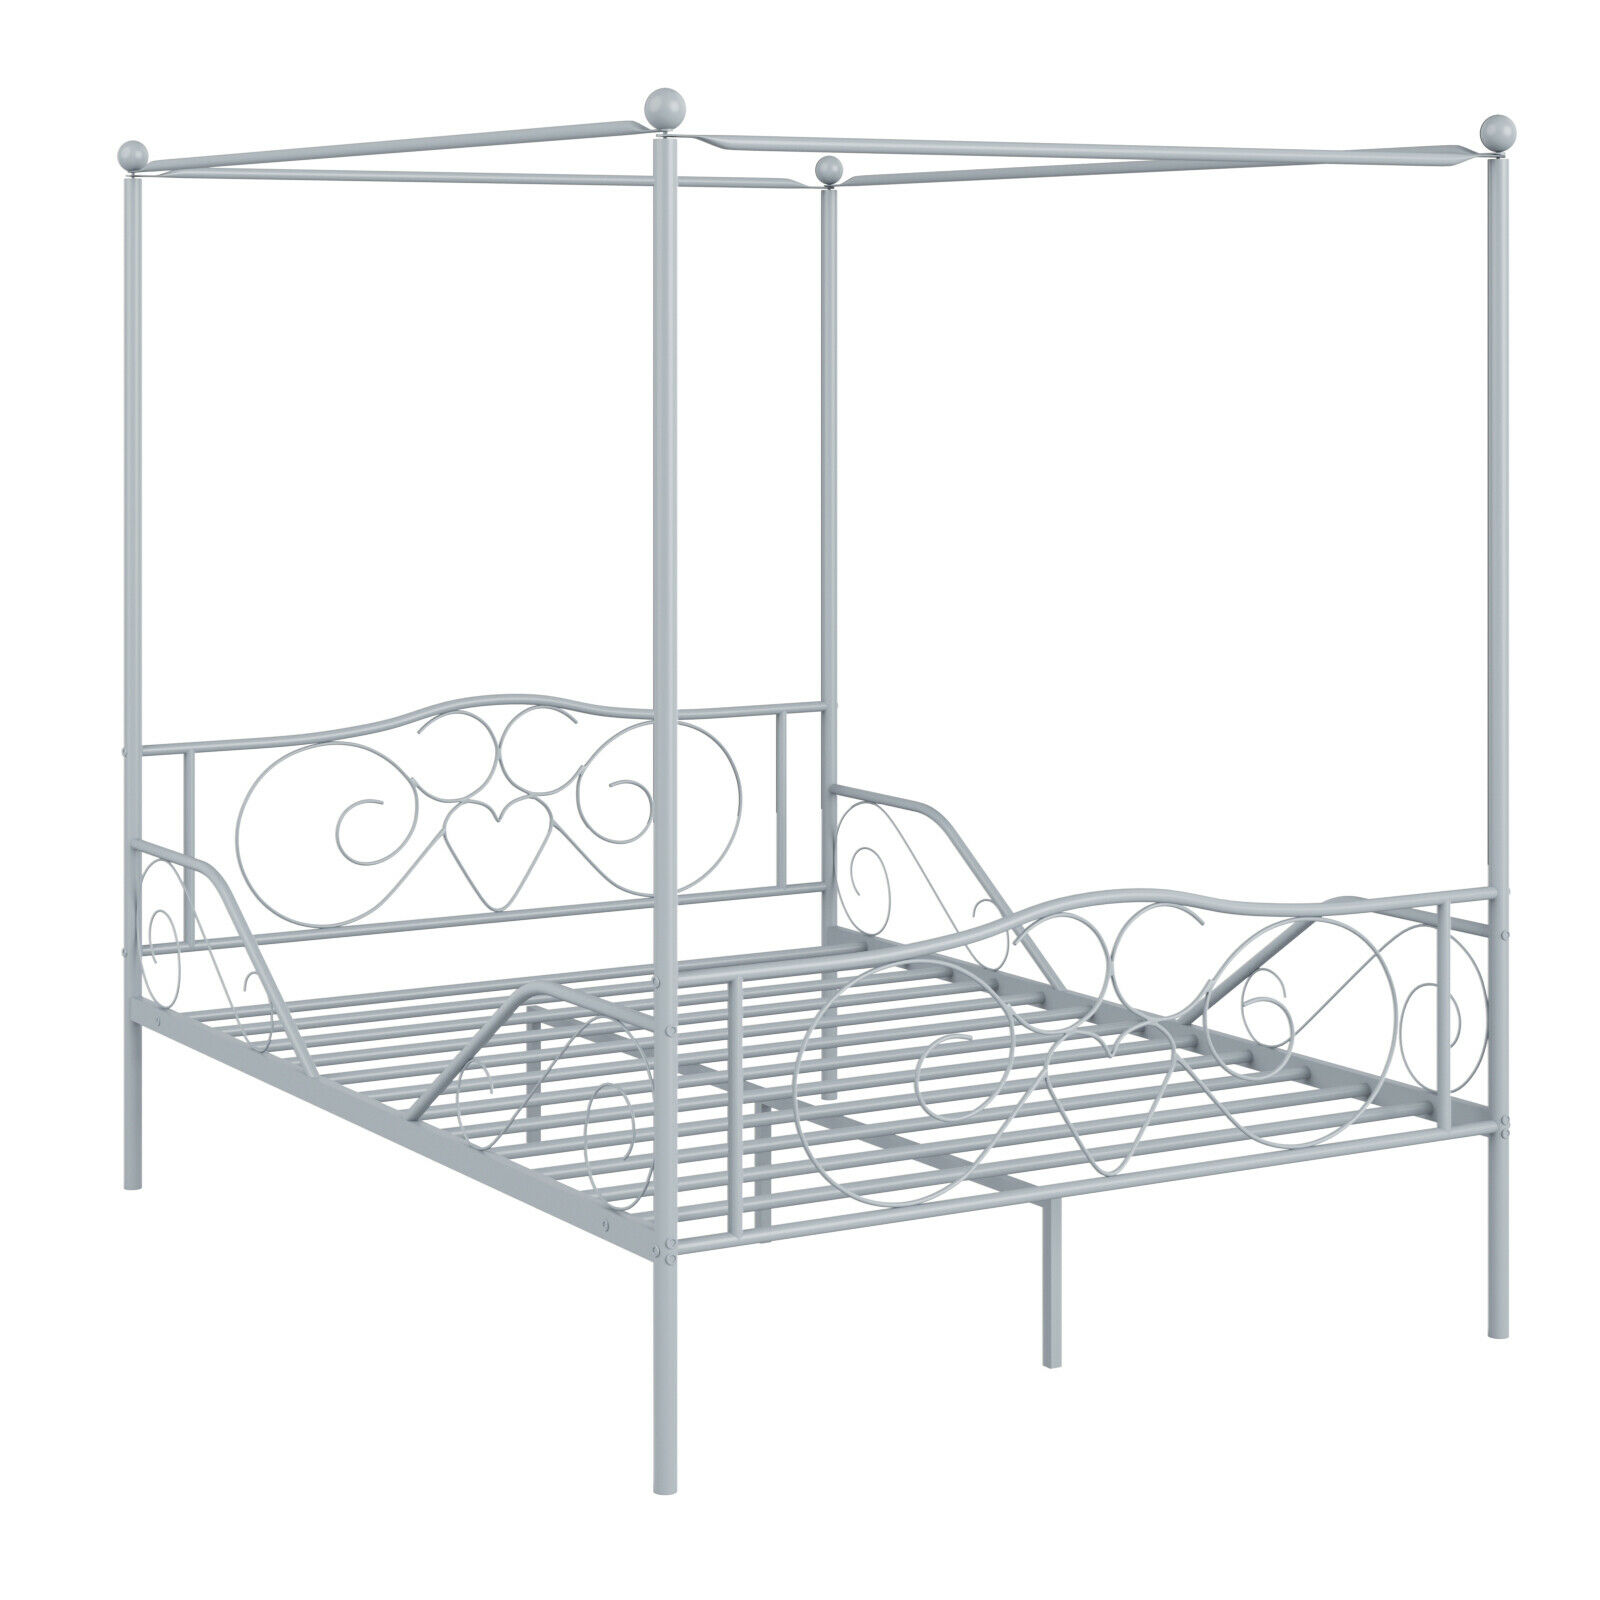 Metal Canopy Bed Frame, Full Size Metal Bed Frame With Headboard And Footboard